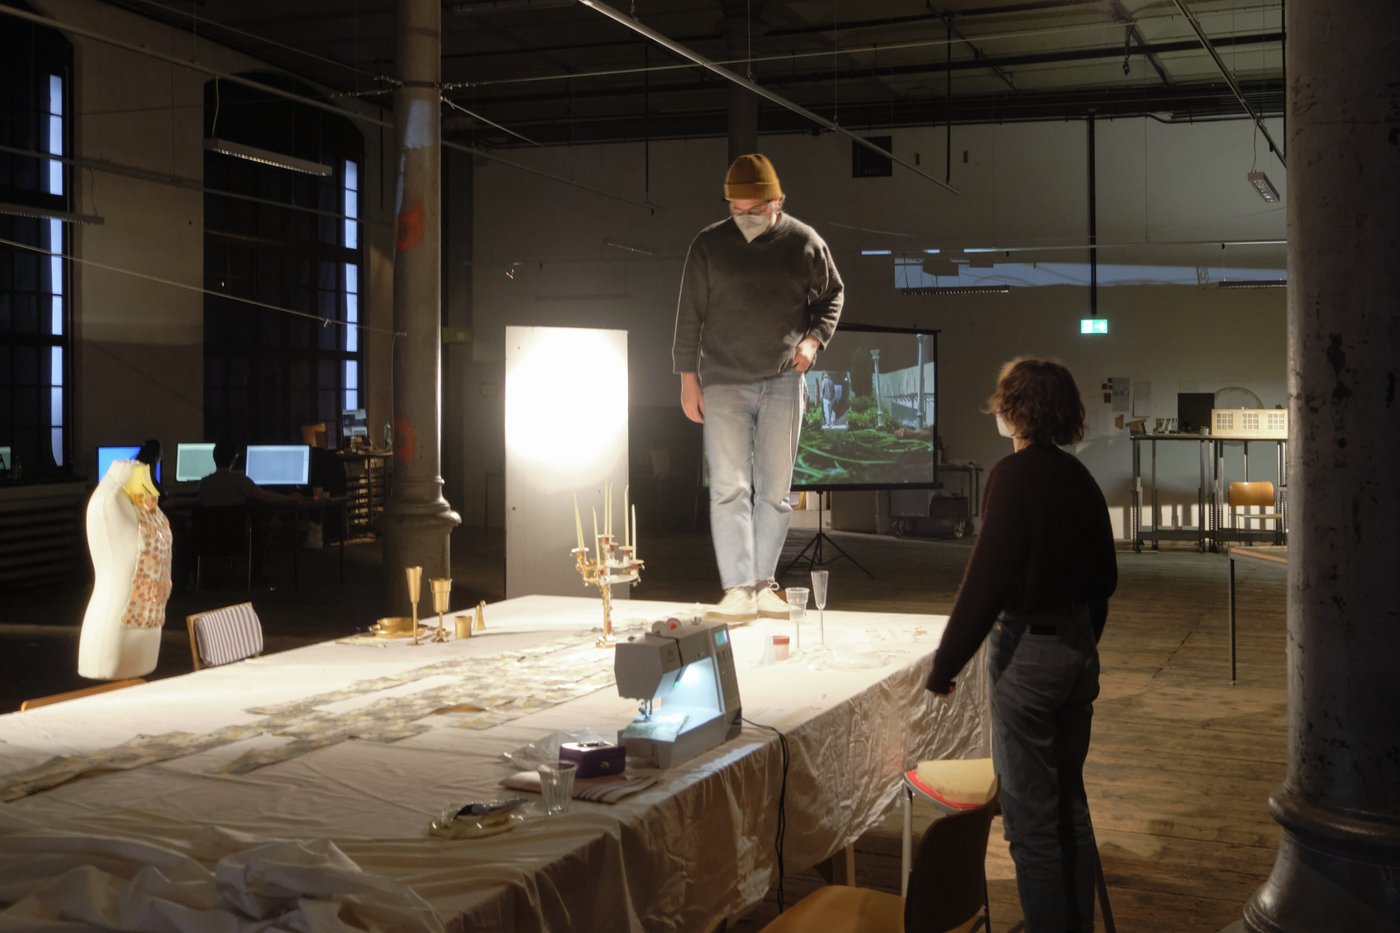 A student stands on a table covered with a cloth, on which a sewing machine, a candlestick, golden dishes and various other utensils lie. A female student is standing to the right. In the background you can see the studio room with a screen, a model and PC workstations.